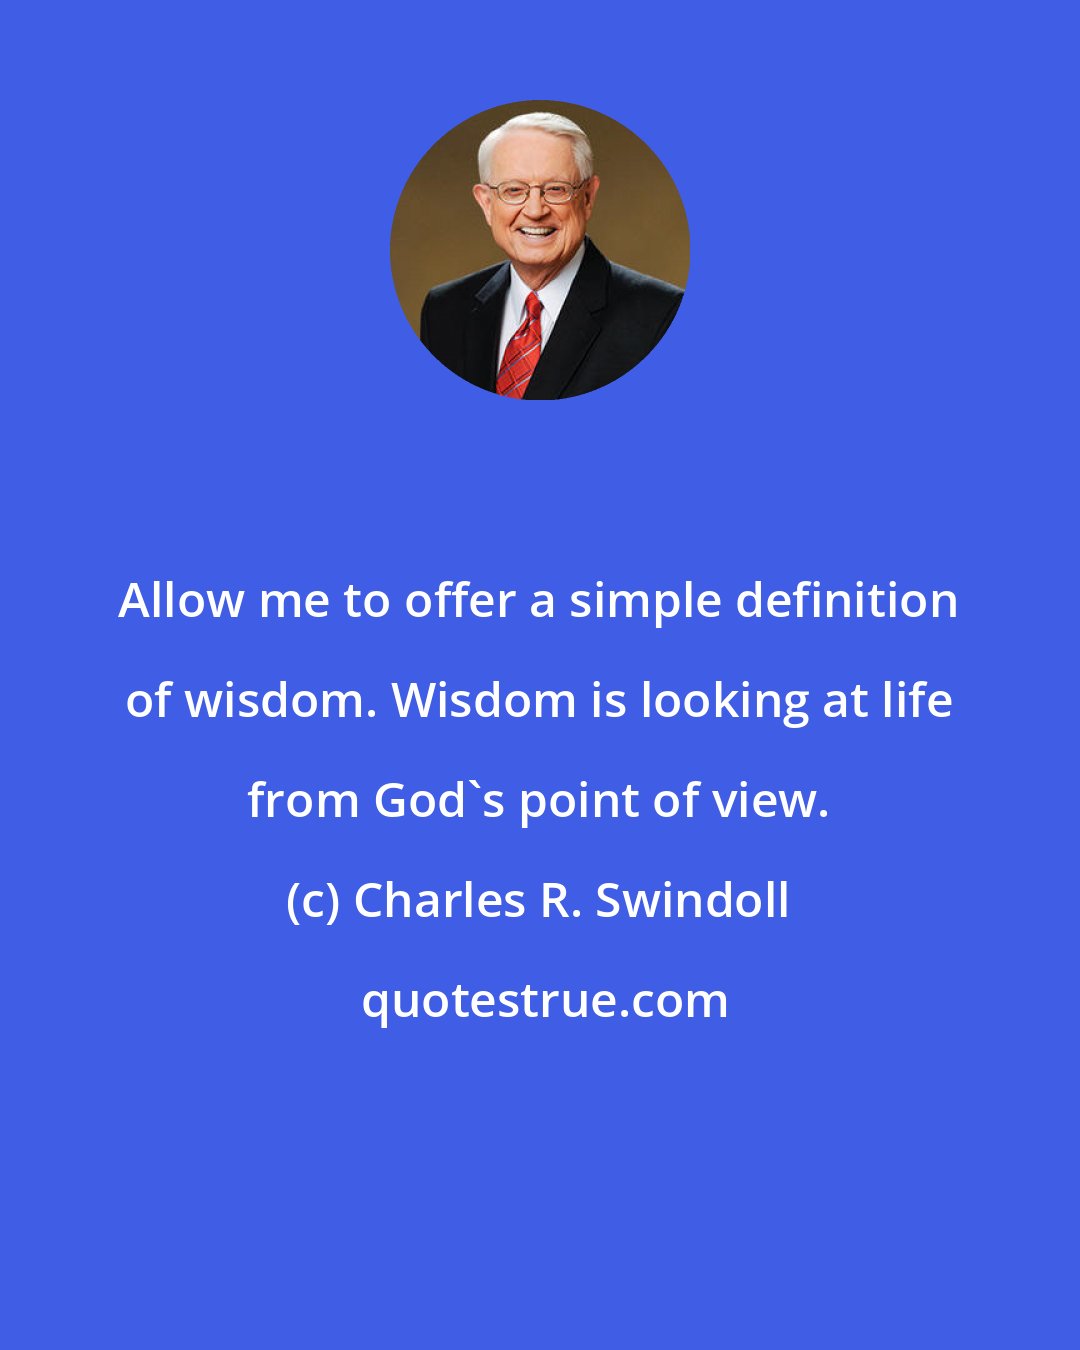 Charles R. Swindoll: Allow me to offer a simple definition of wisdom. Wisdom is looking at life from God's point of view.